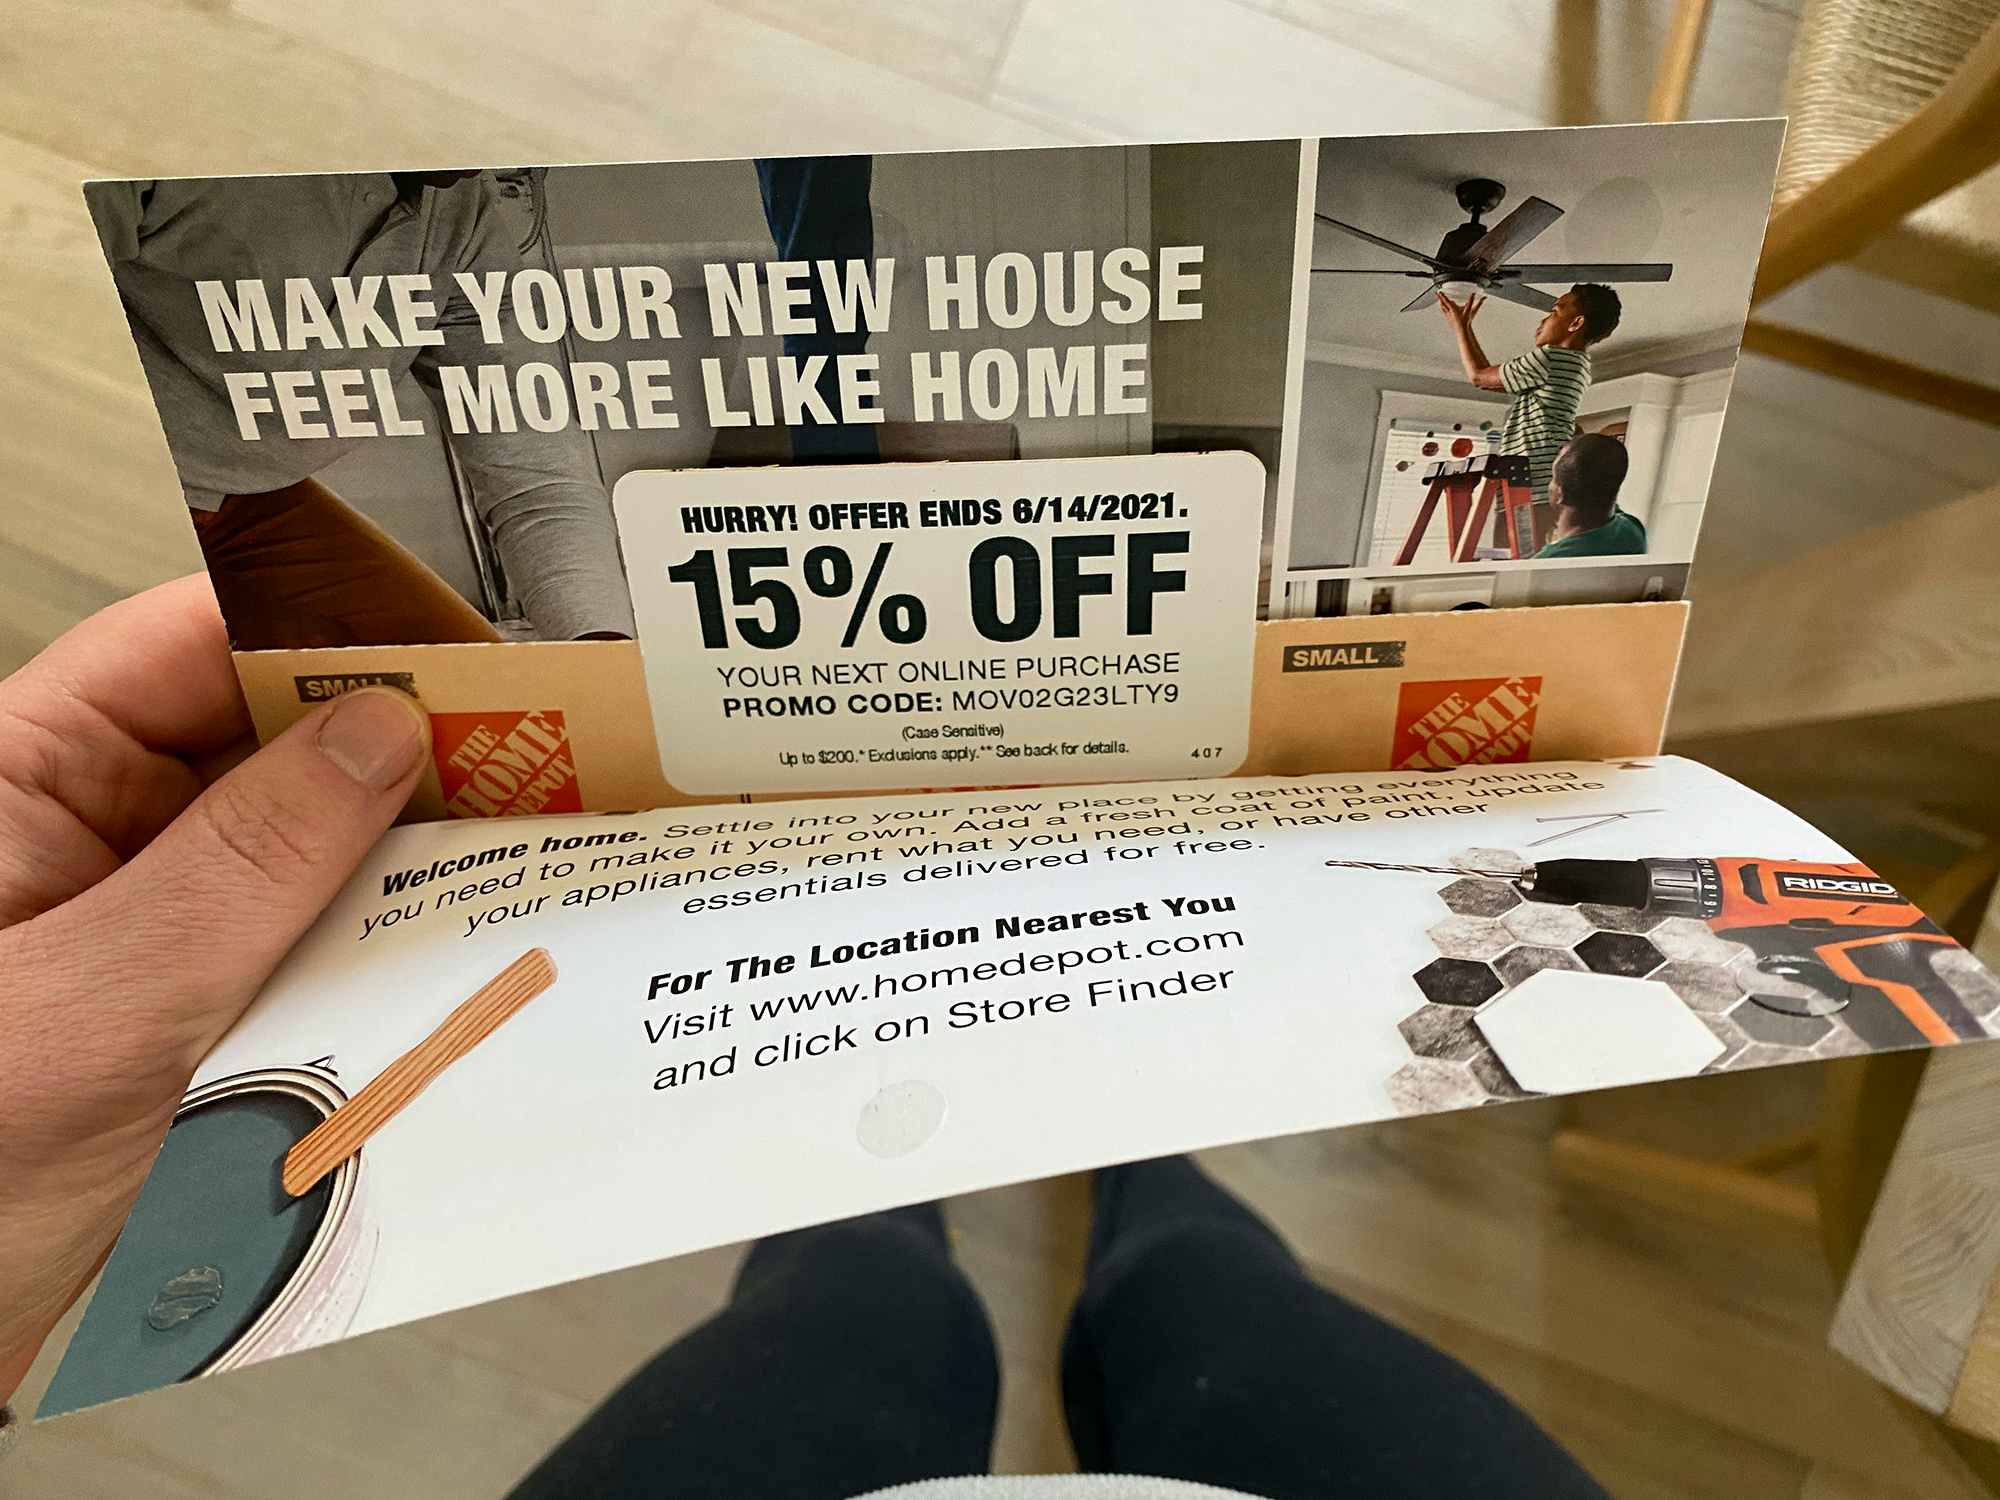 https://prod-cdn-thekrazycouponlady.imgix.net/wp-content/uploads/2022/01/home-depot-moving-coupon1-1643326106-1643326106.jpg?auto=format&fit=fill&q=25